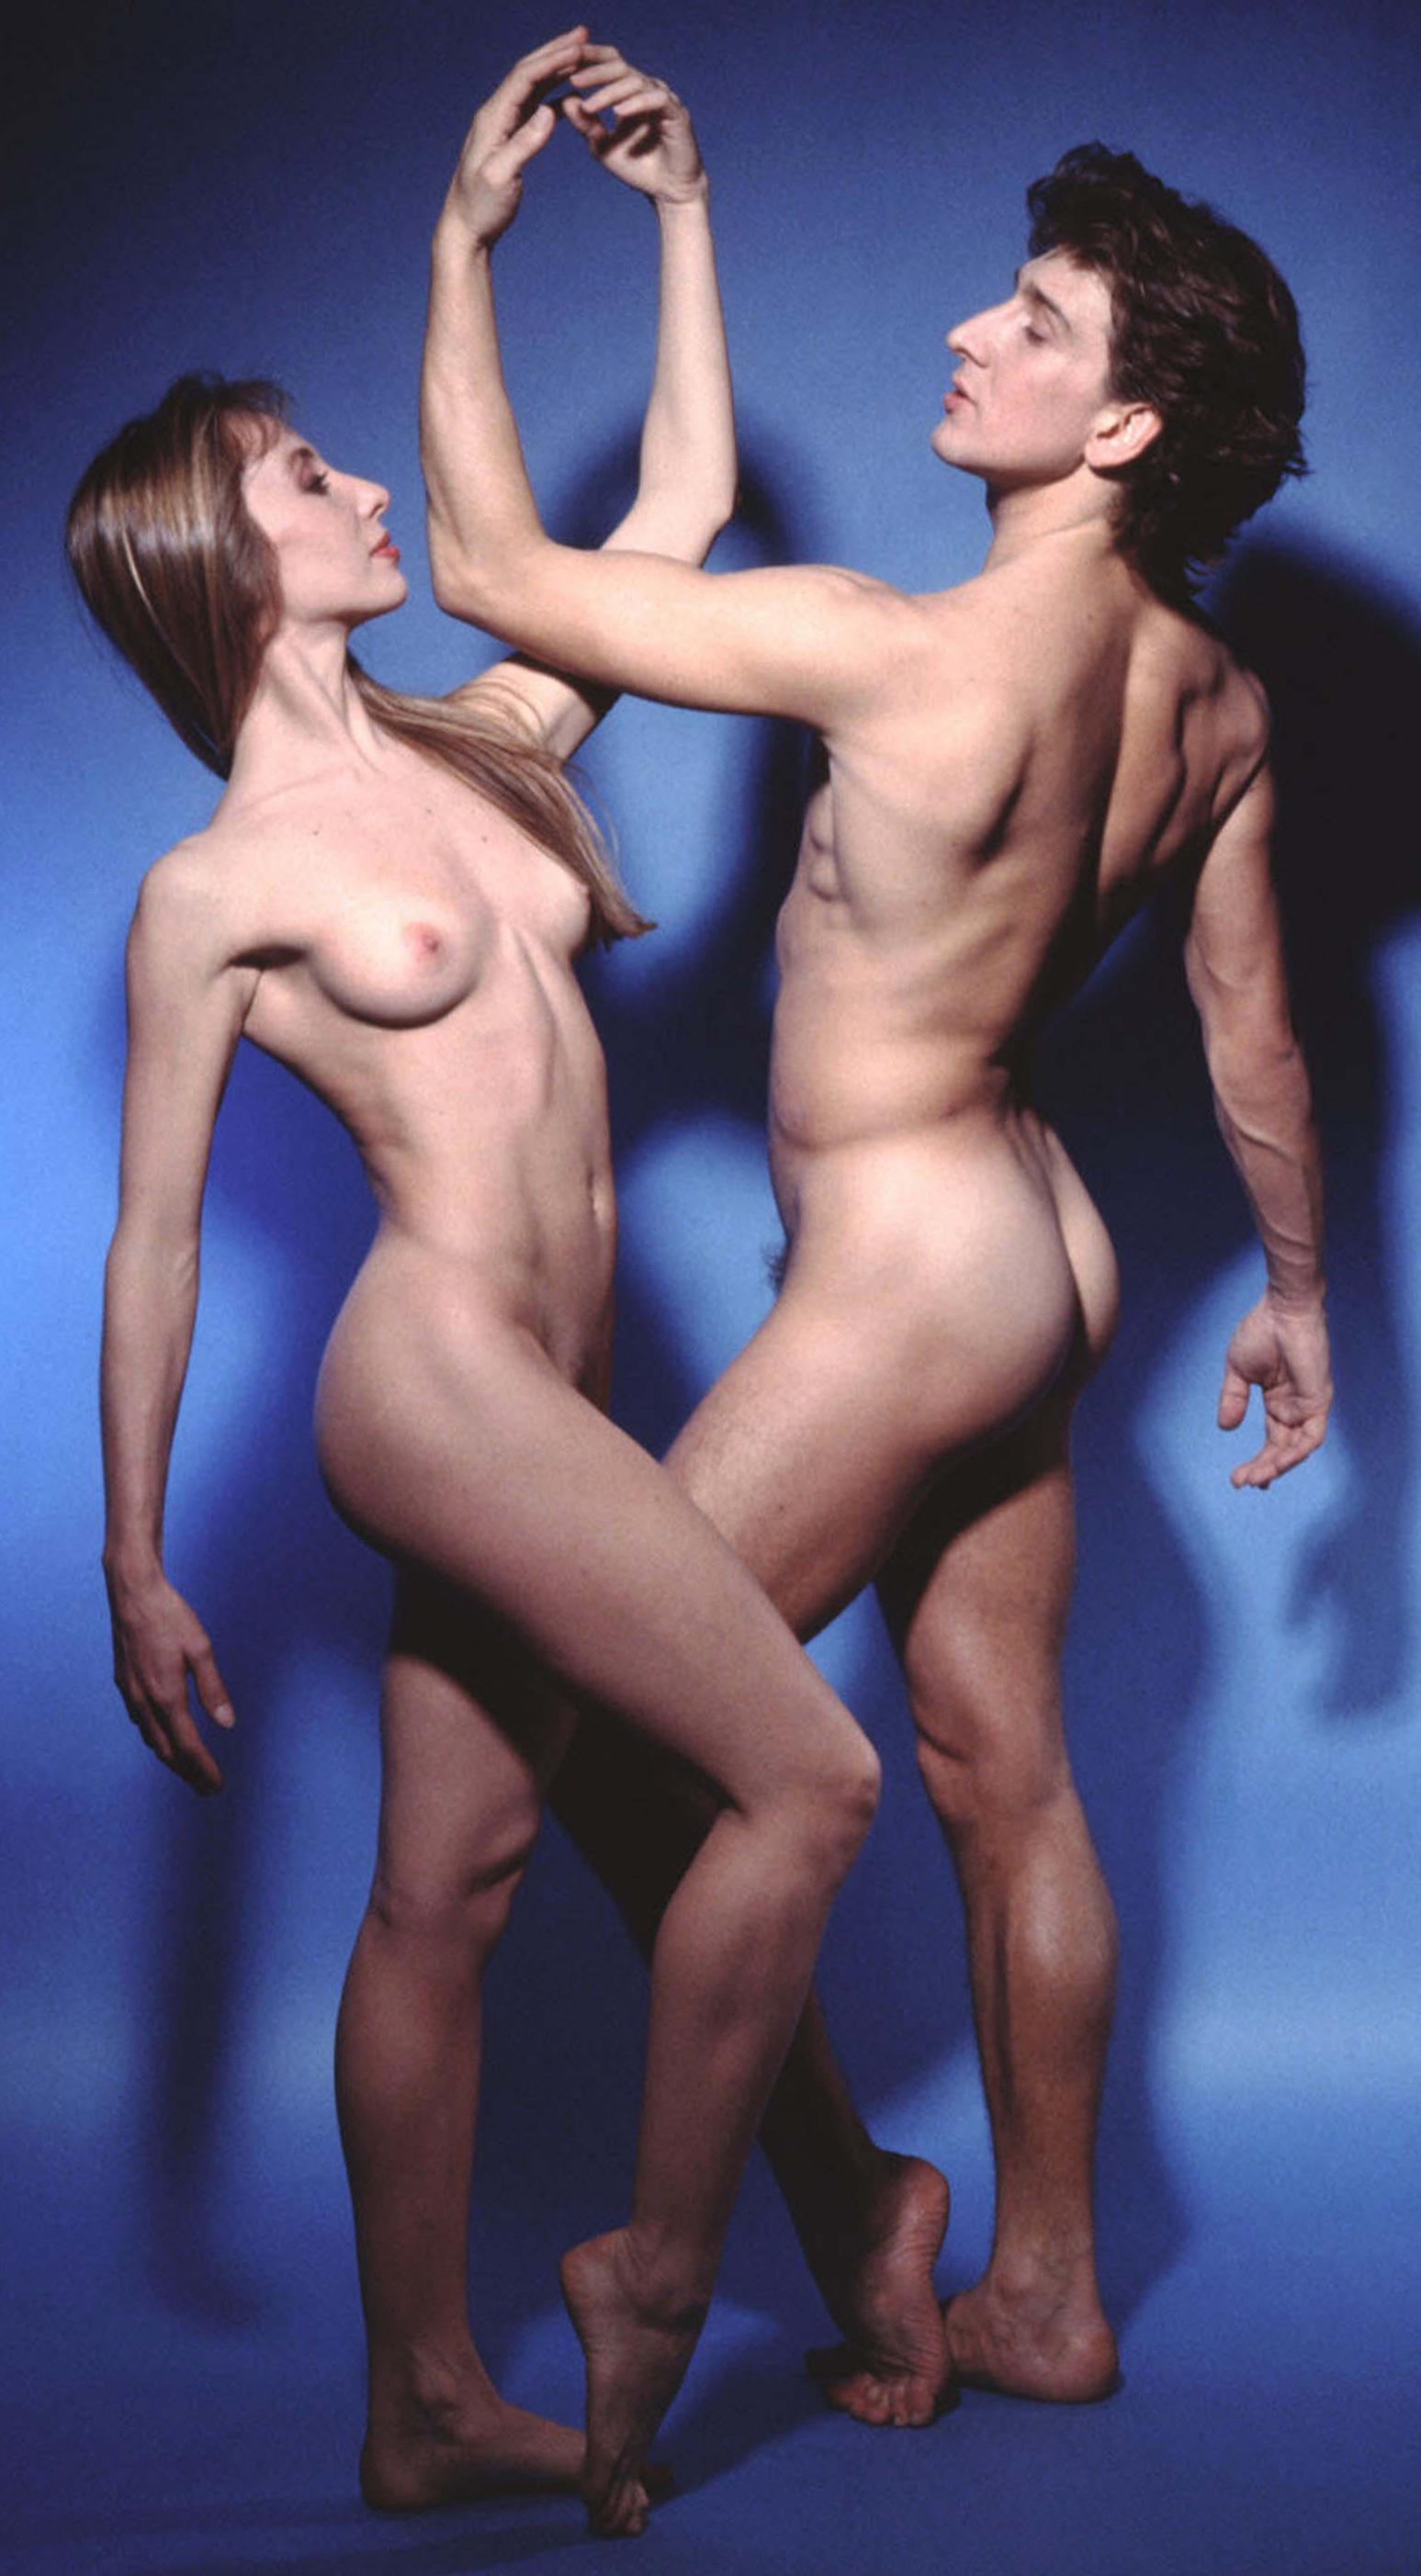 Famed dancers Julio Bocca & Eleonora Cassano nude for 'Playboy' magazine - Photograph by Jack Mitchell